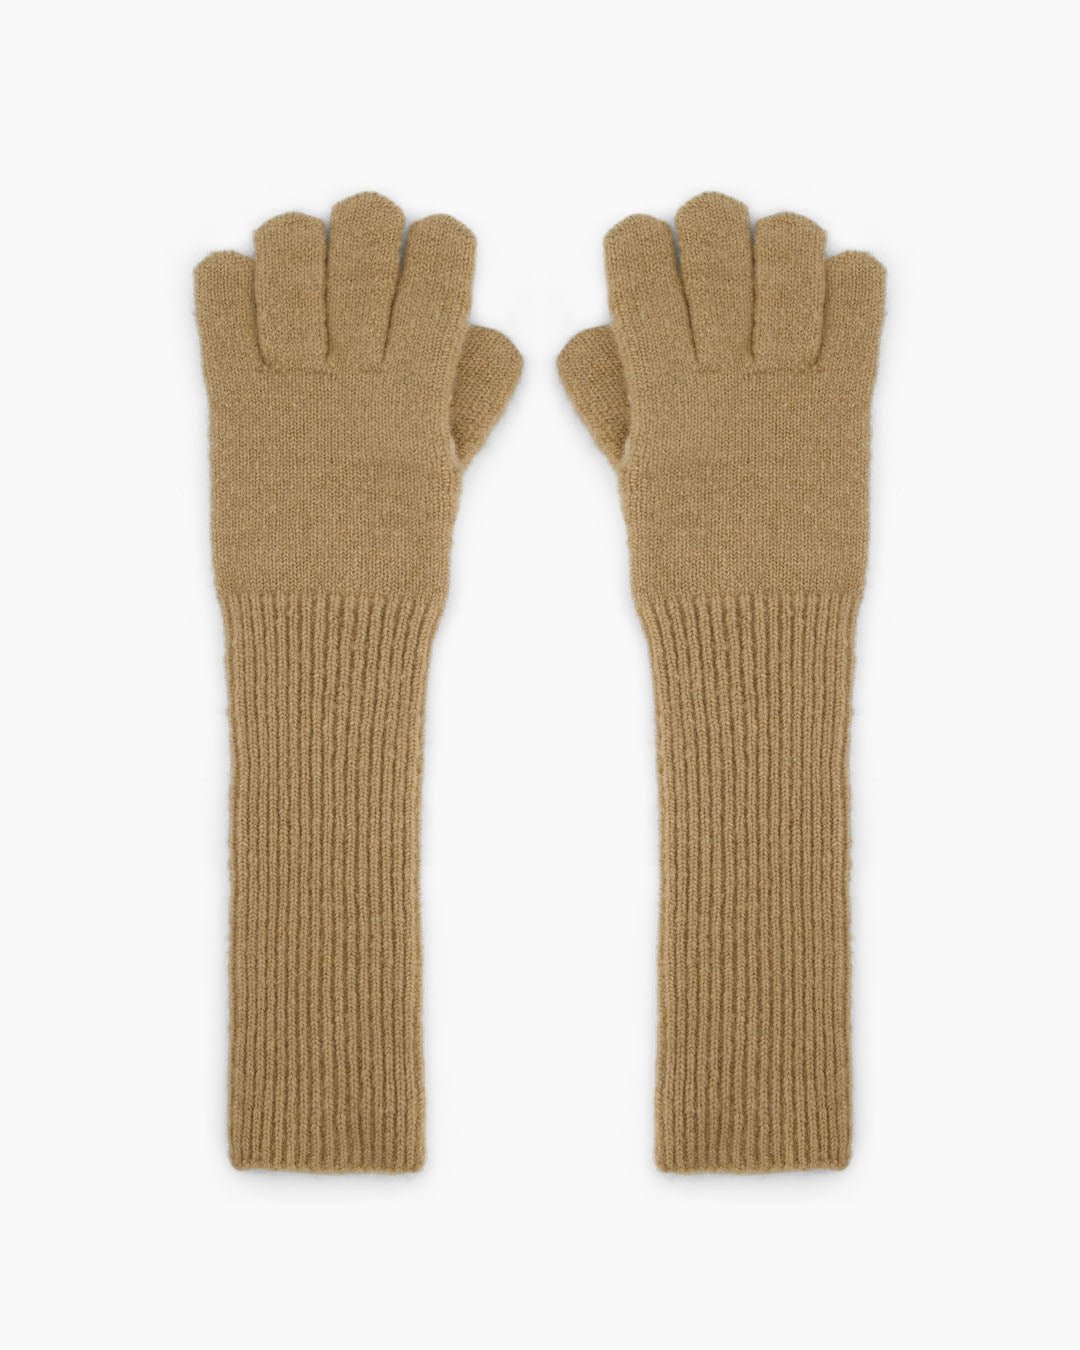 Another Label  ORVA mittens / women